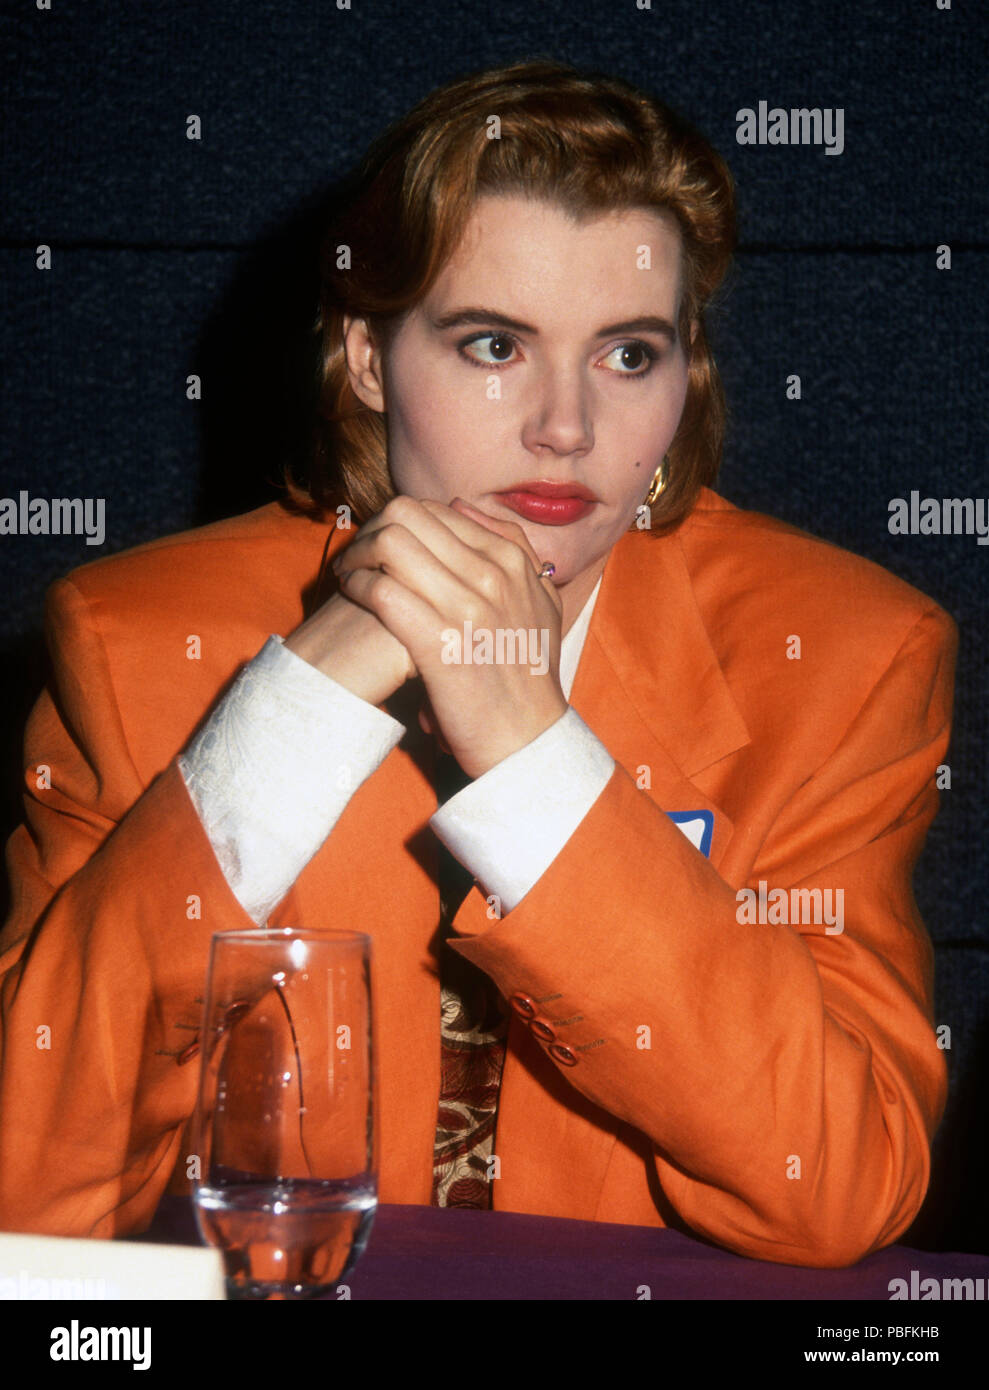 BEVERLY HILLS, CA - APRIL 1: Actress Geena Davis attends WSA-SAG Access Program Event on April 1, 1992 at Nikko Hotel in Beverly Hills, California. Photo by Barry King/Alamy Stock Photo Stock Photo